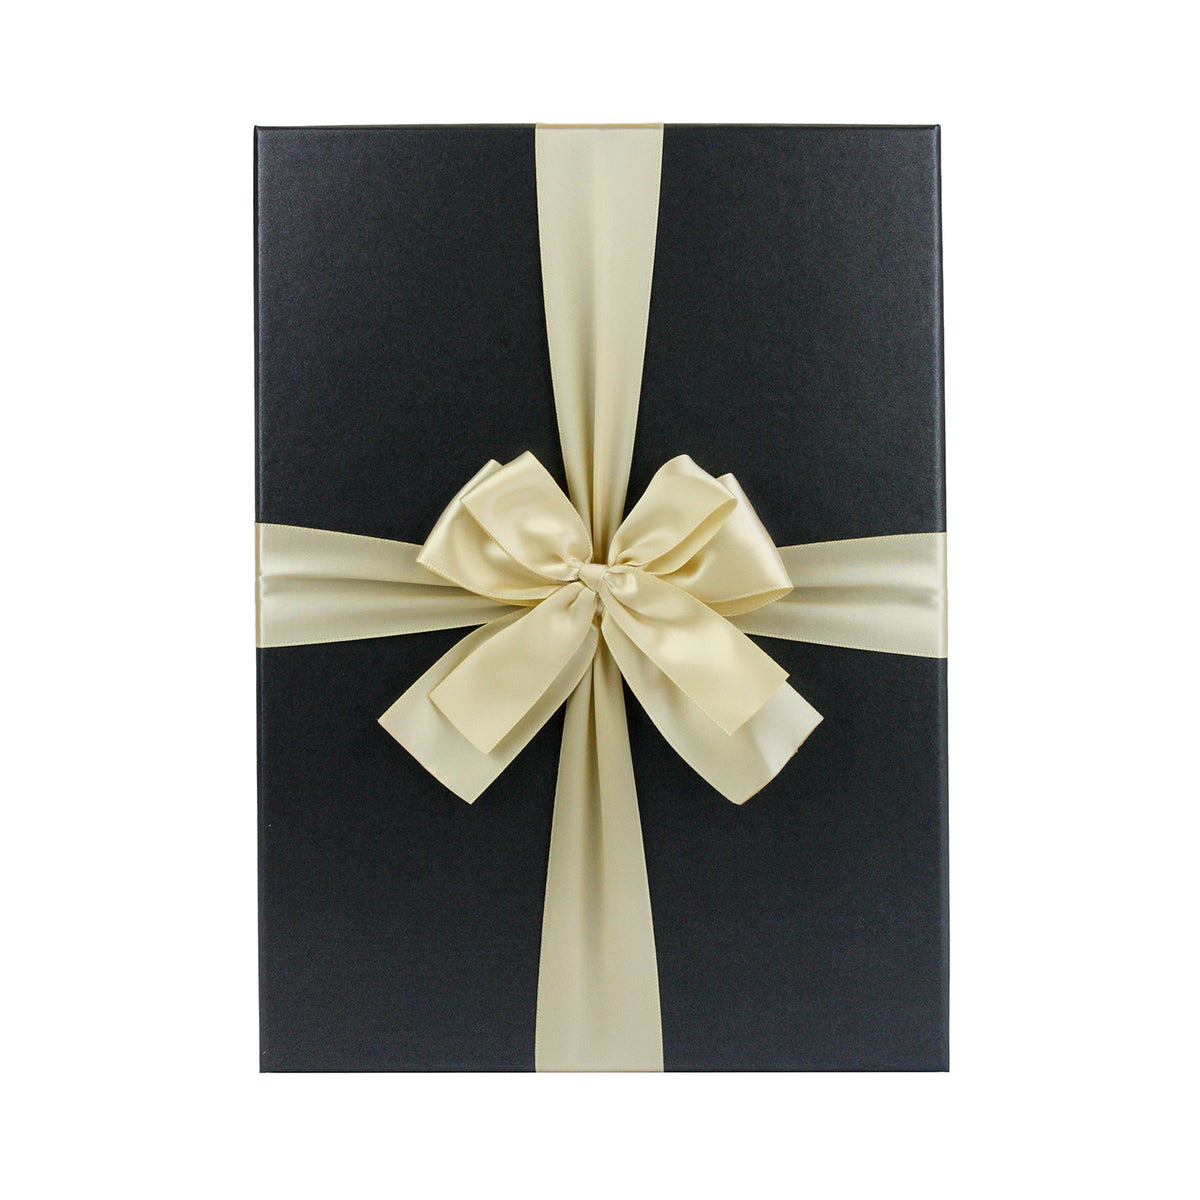 Sophisticated black gift box with decorative bow